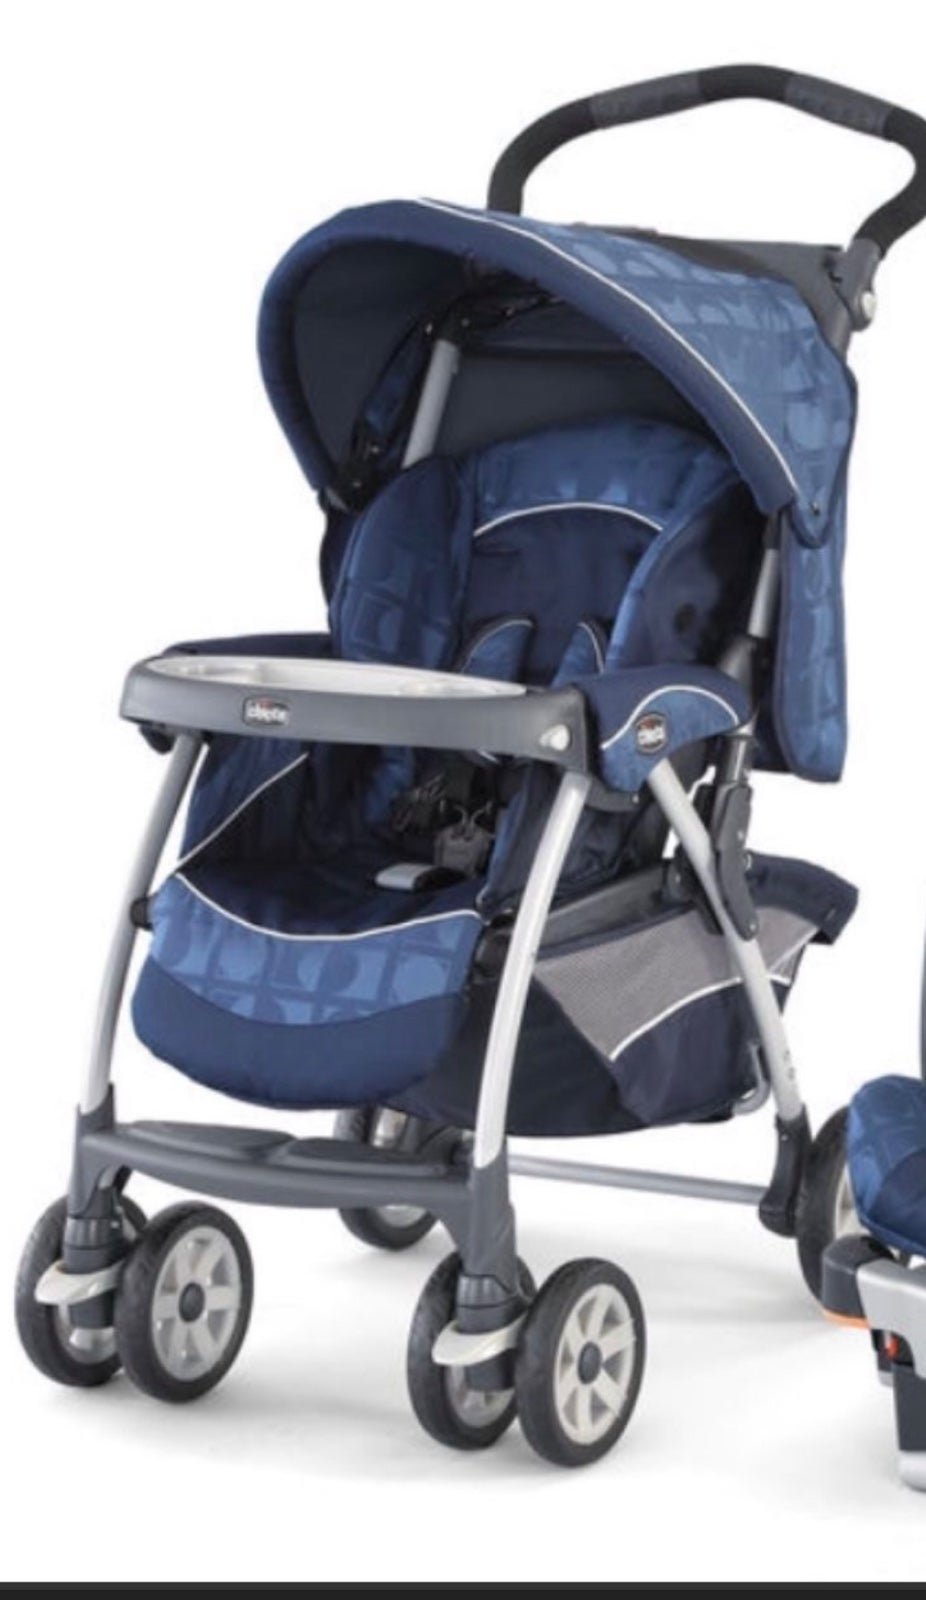 Chicco - Stroller blue - Great condition i7rQC281L